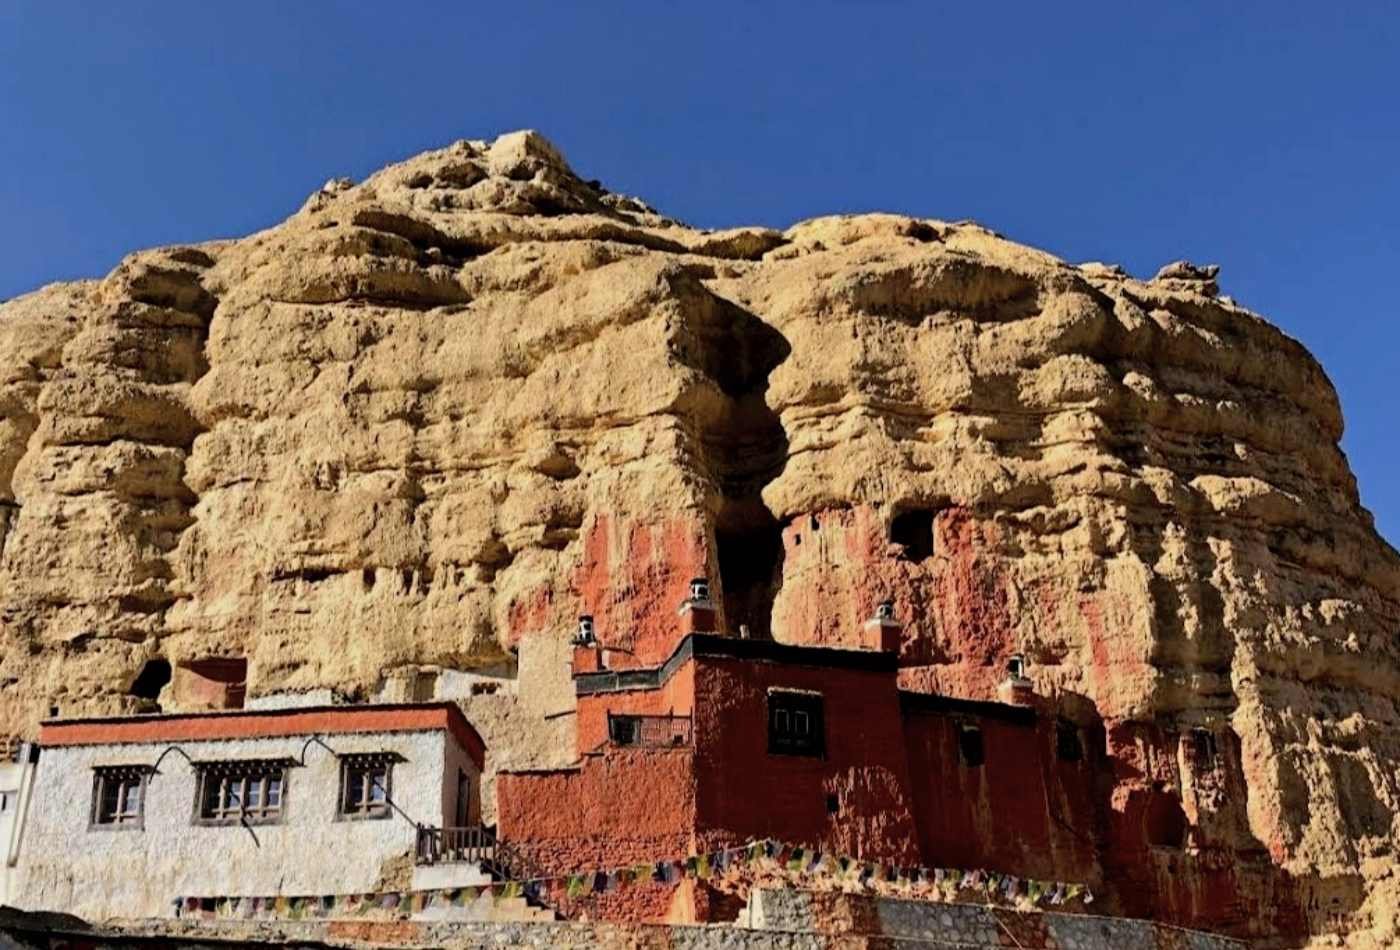 A vibrant red and white painted monastery nestled amidst the hills in the Chossar Village in the Upper Mustang region.